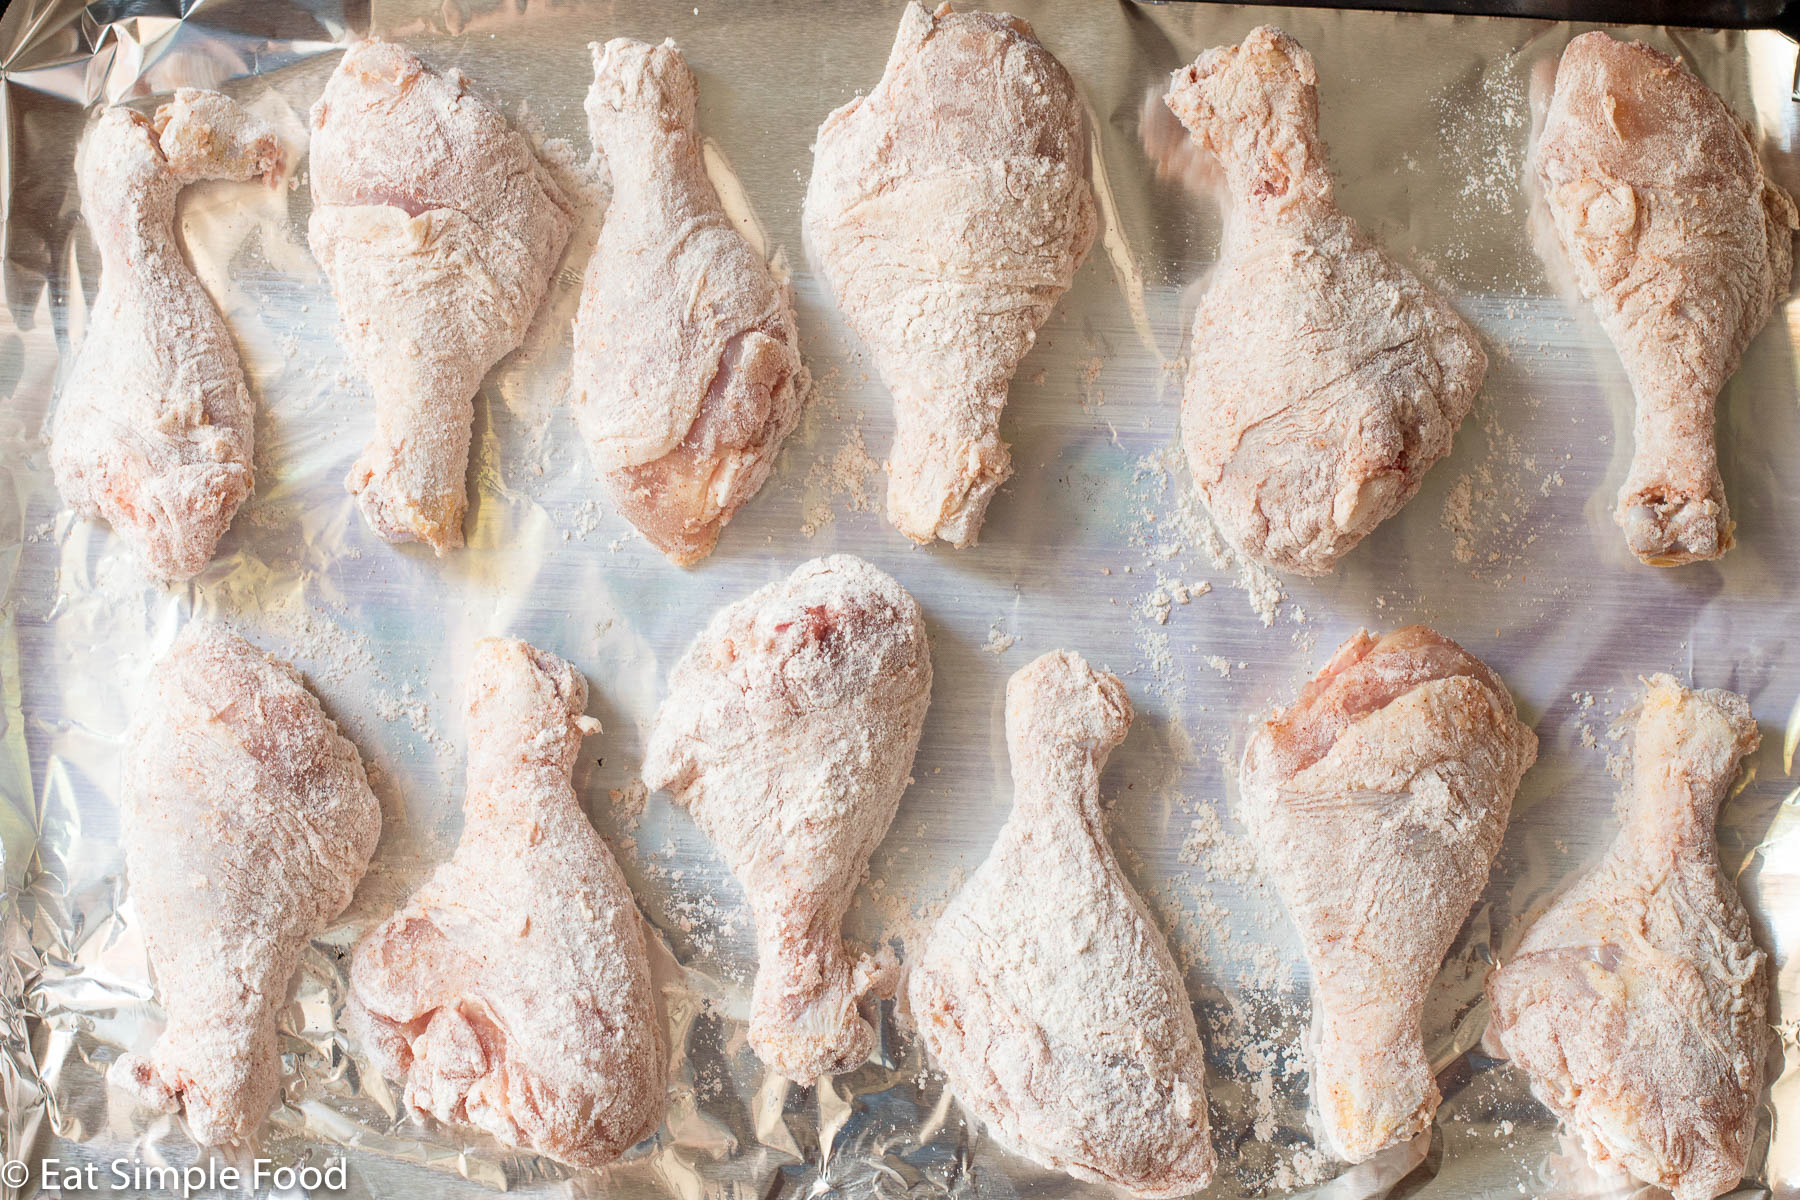 12 Raw Chicken drumsticks on an aluminum covered baking sheet. Top view.